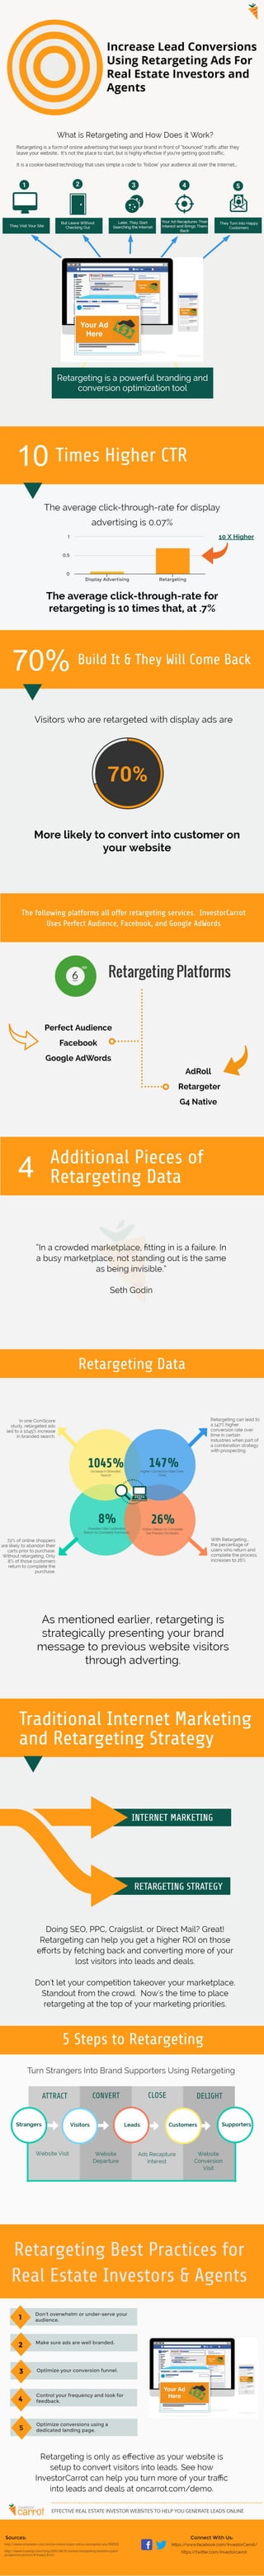 How To Increase Real Estate Investing Leads With Retargeting Ads [Infographic] 